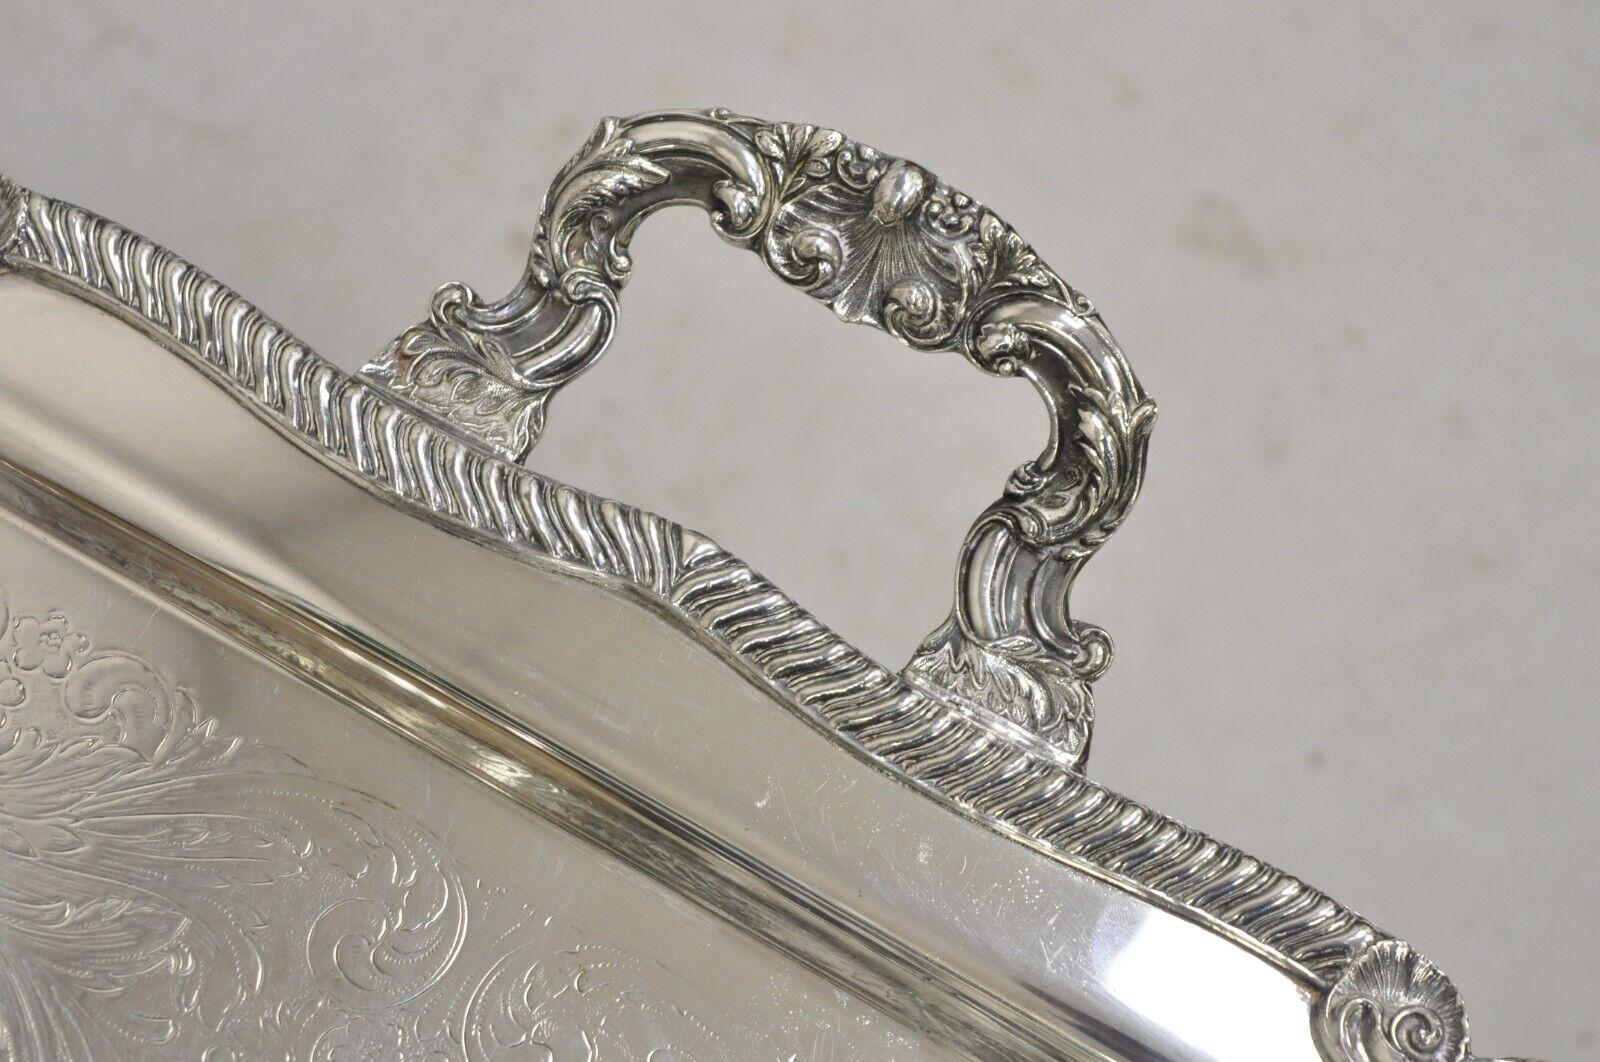 Sheridan Large Ornate Silver Plated English Victorian Style Serving Platter Tray 3